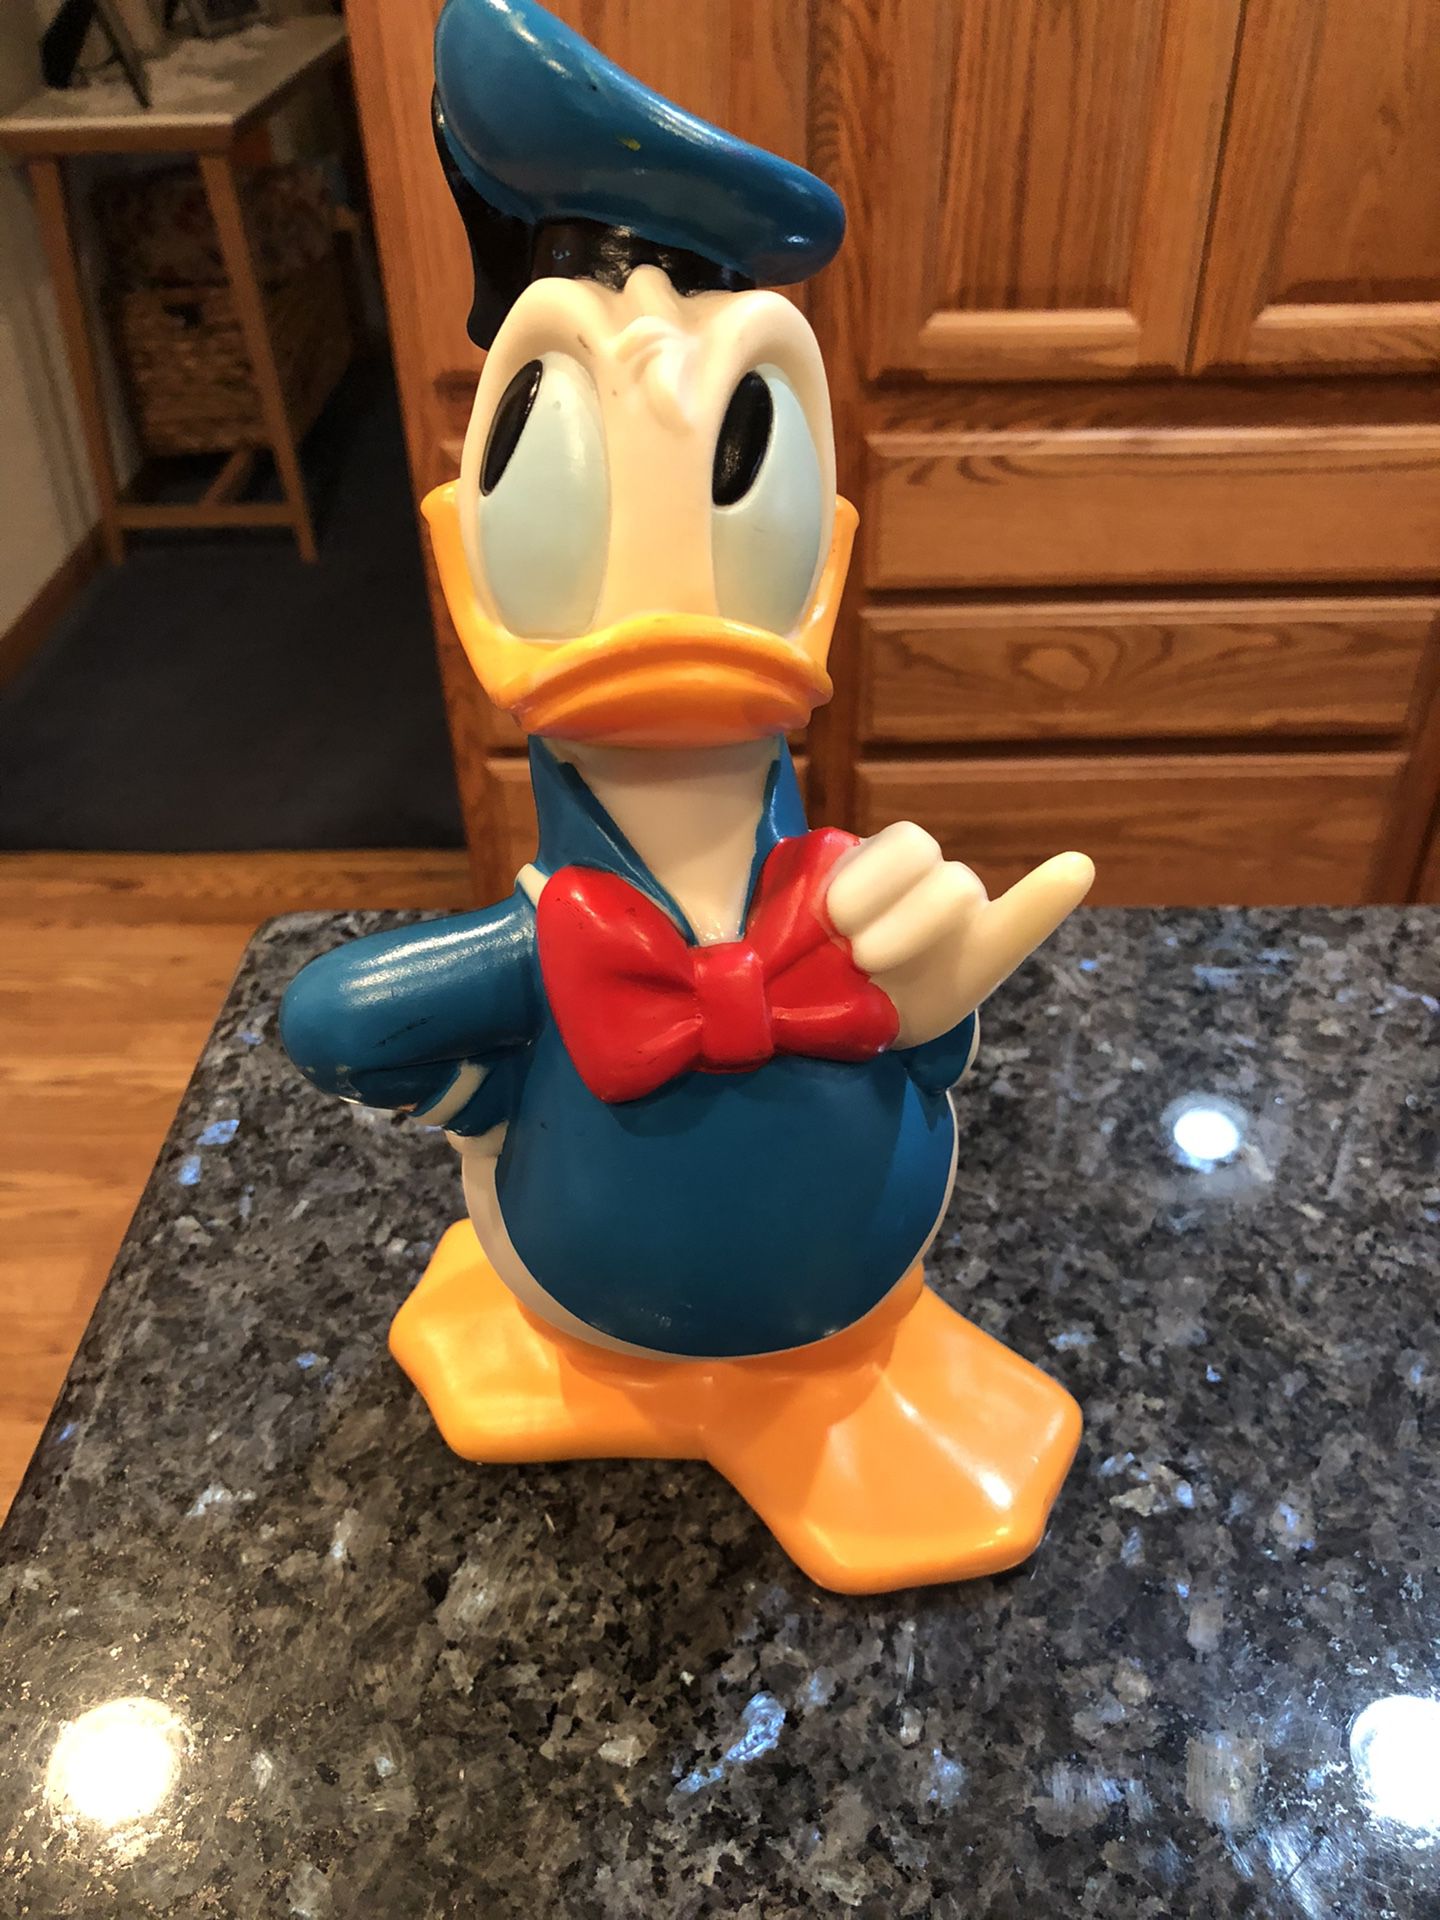 Vintage iLlCO Toy Bank Walt Disney Productions Collectable Donald Duck Bank